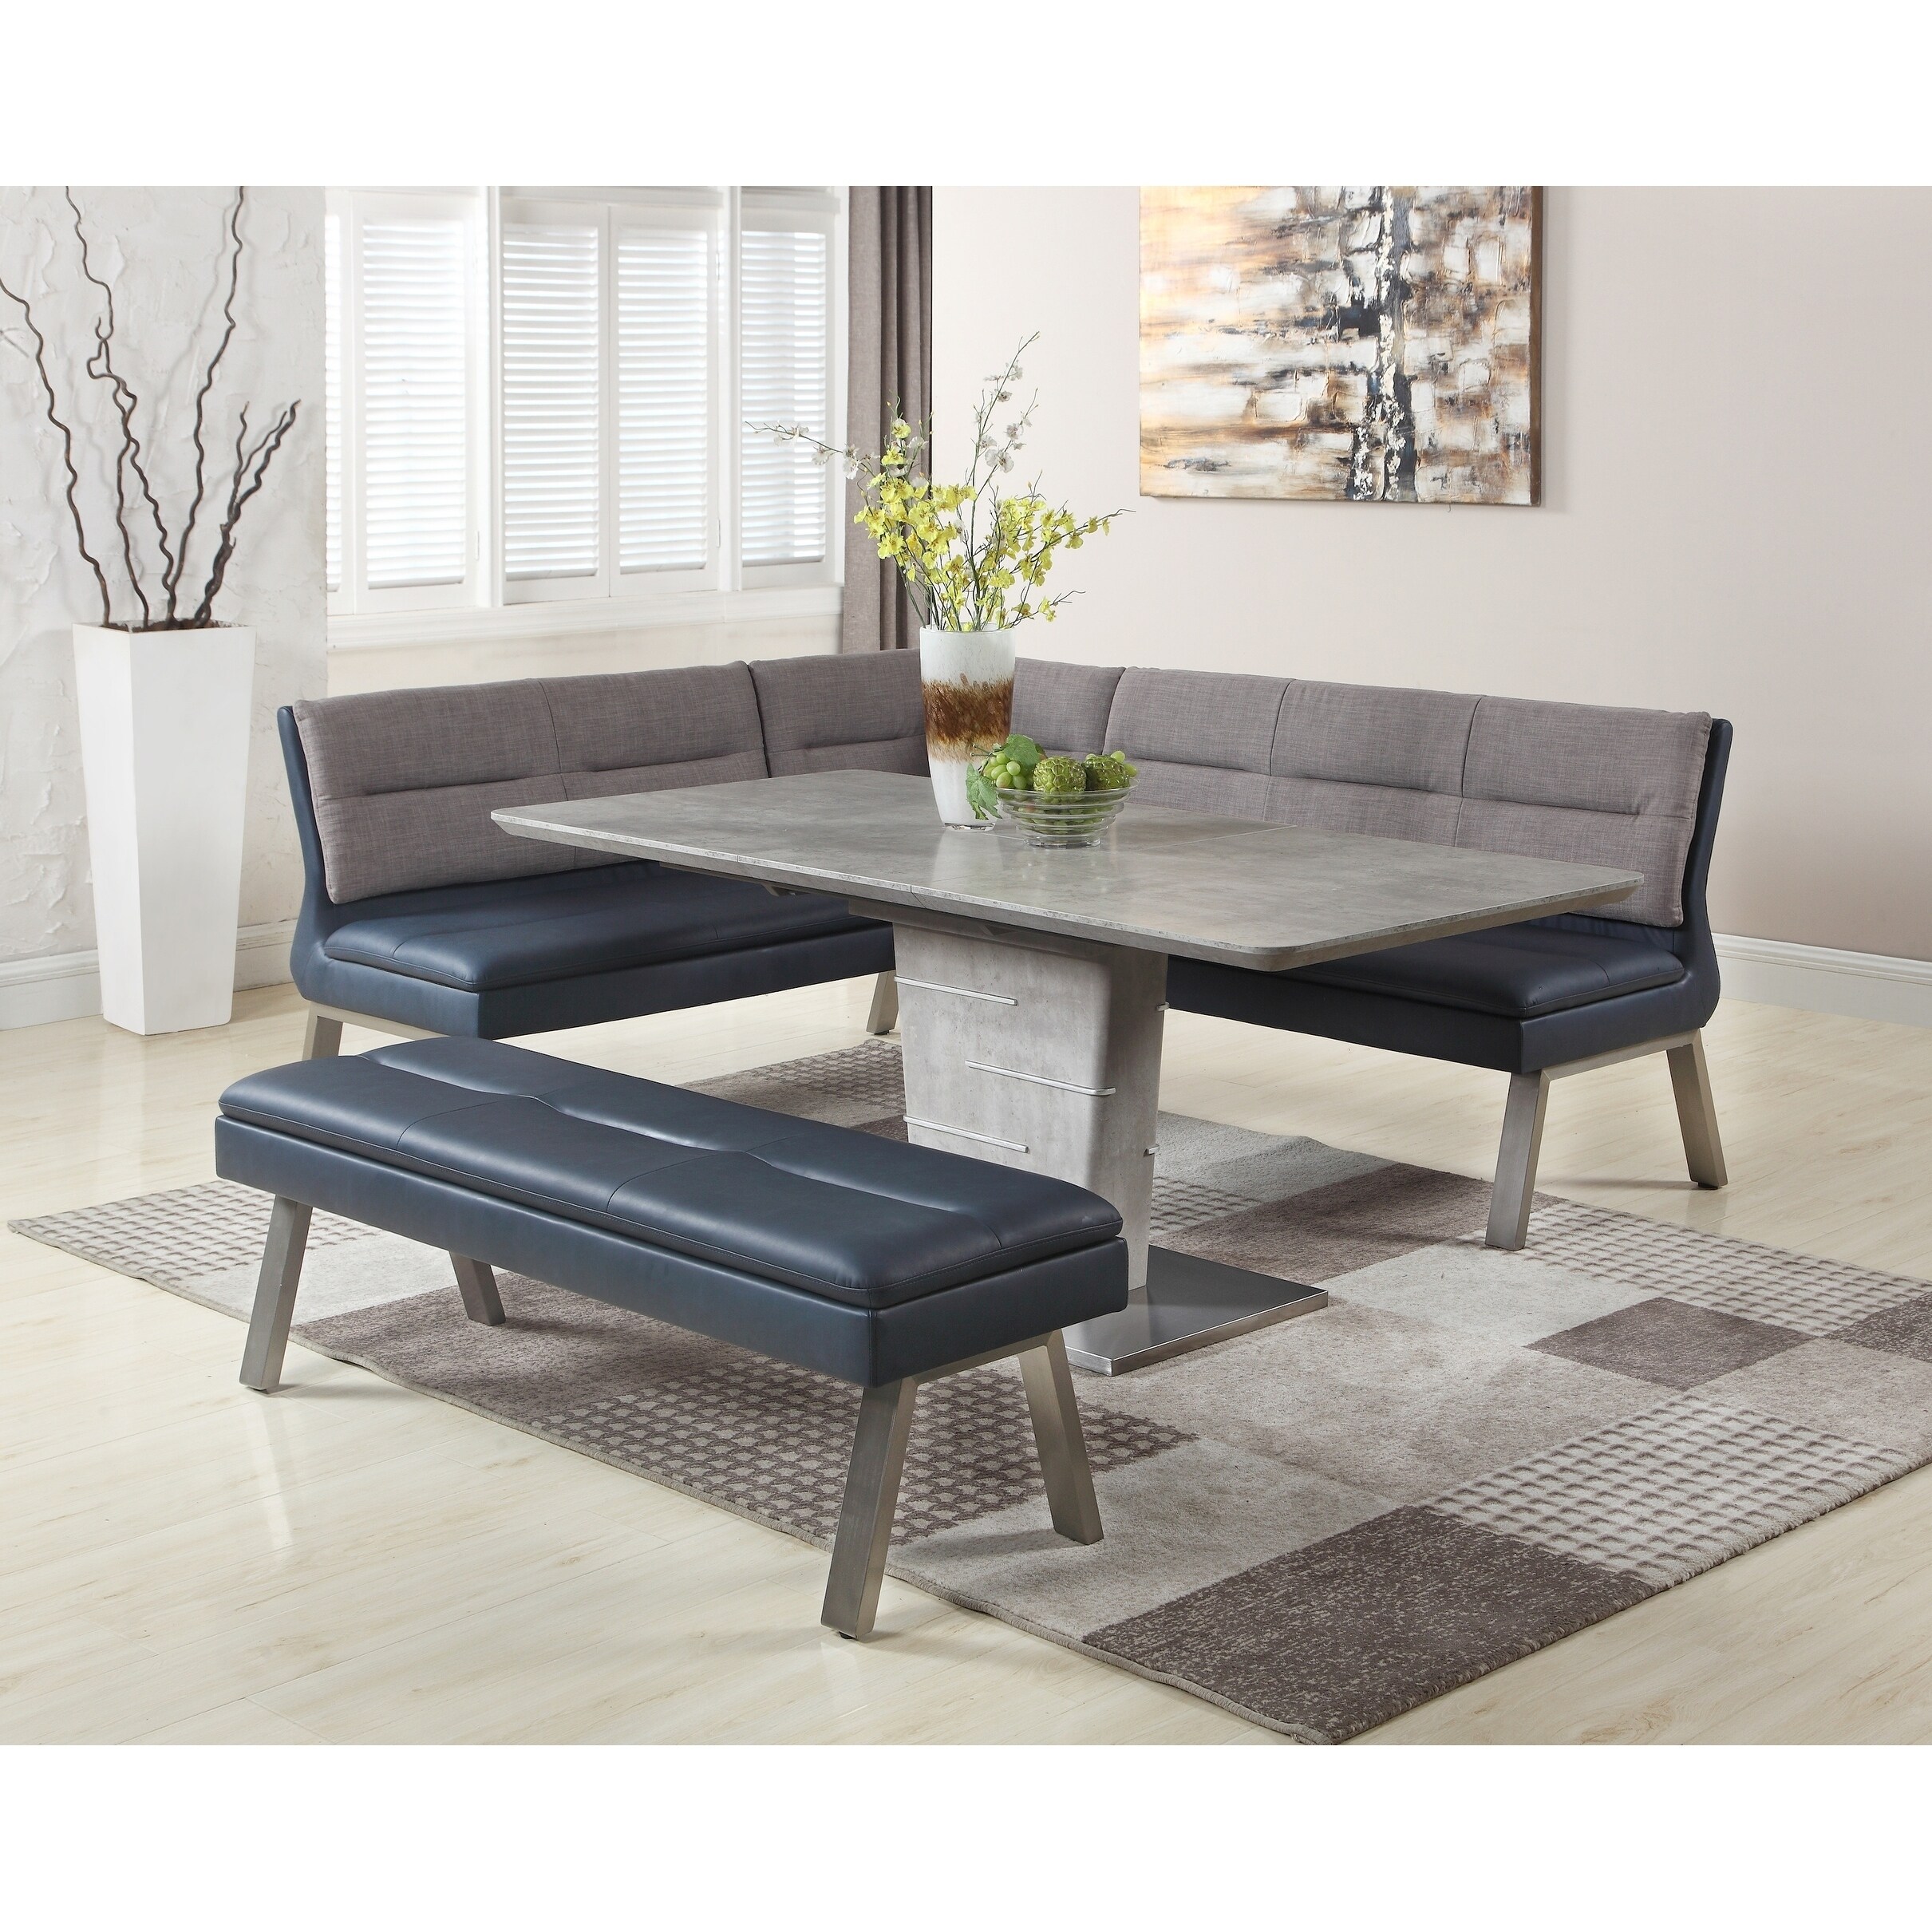 Somette Janice Extendable Dining Table